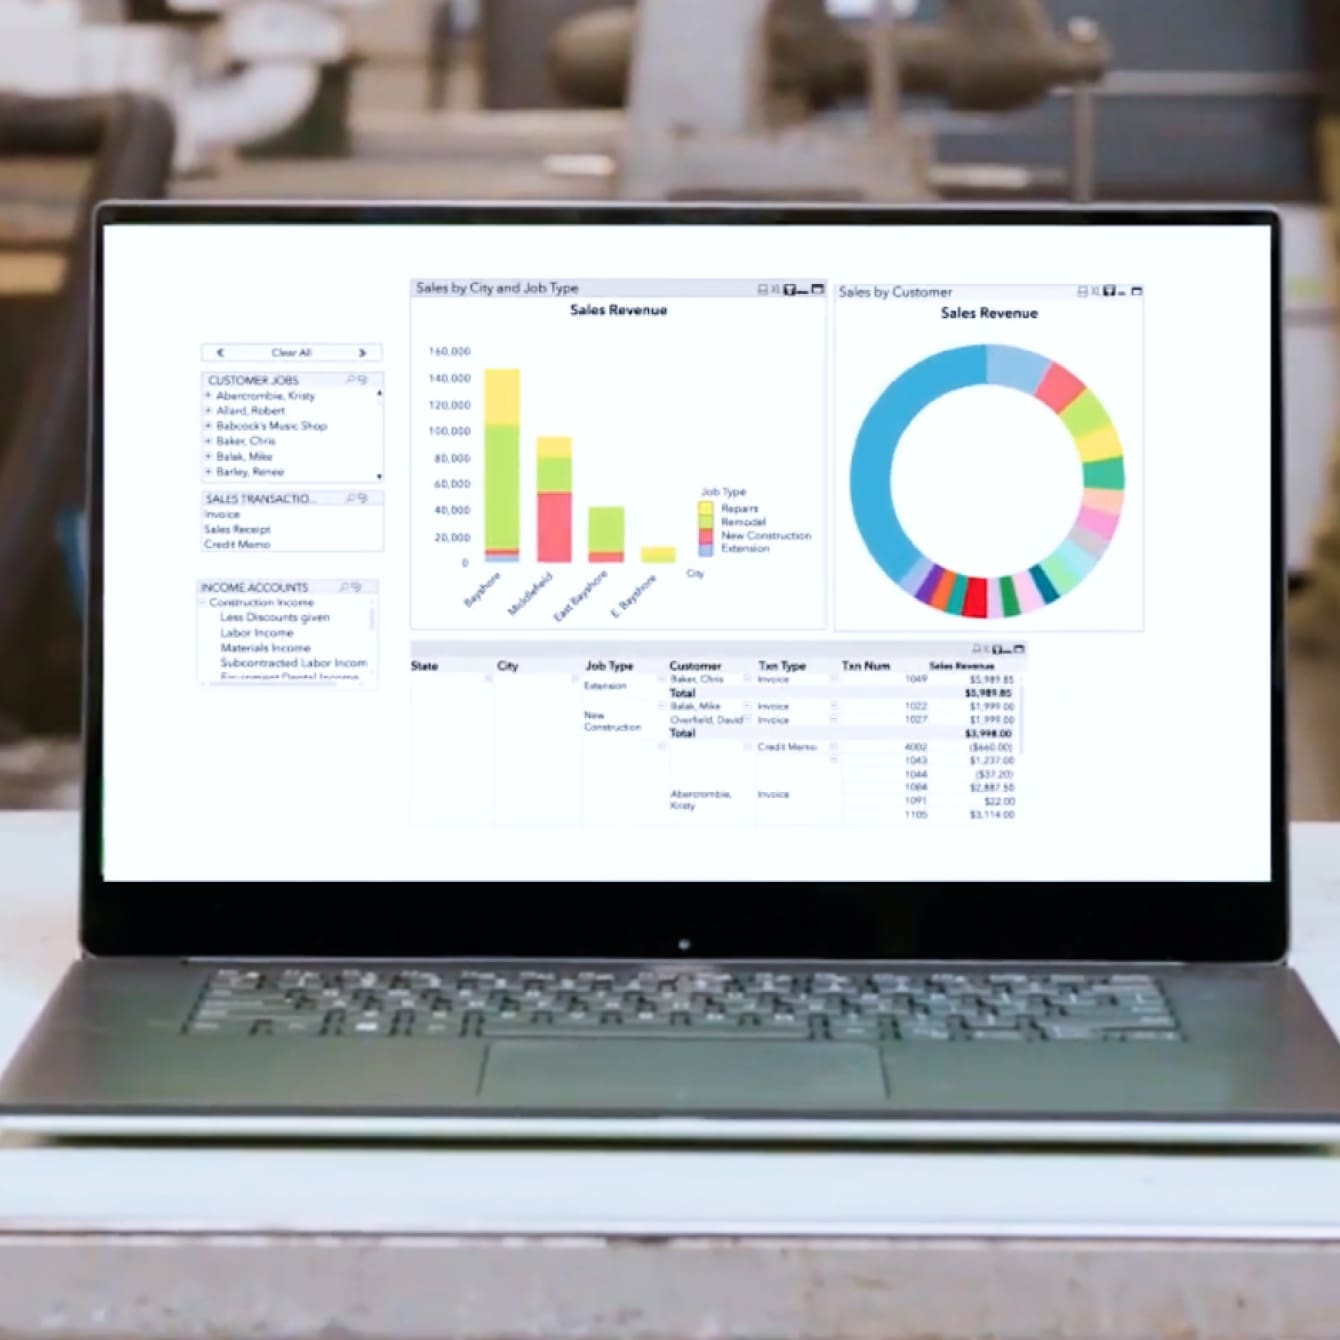 Laptop with QuickBooks Enterprise sales report on screen